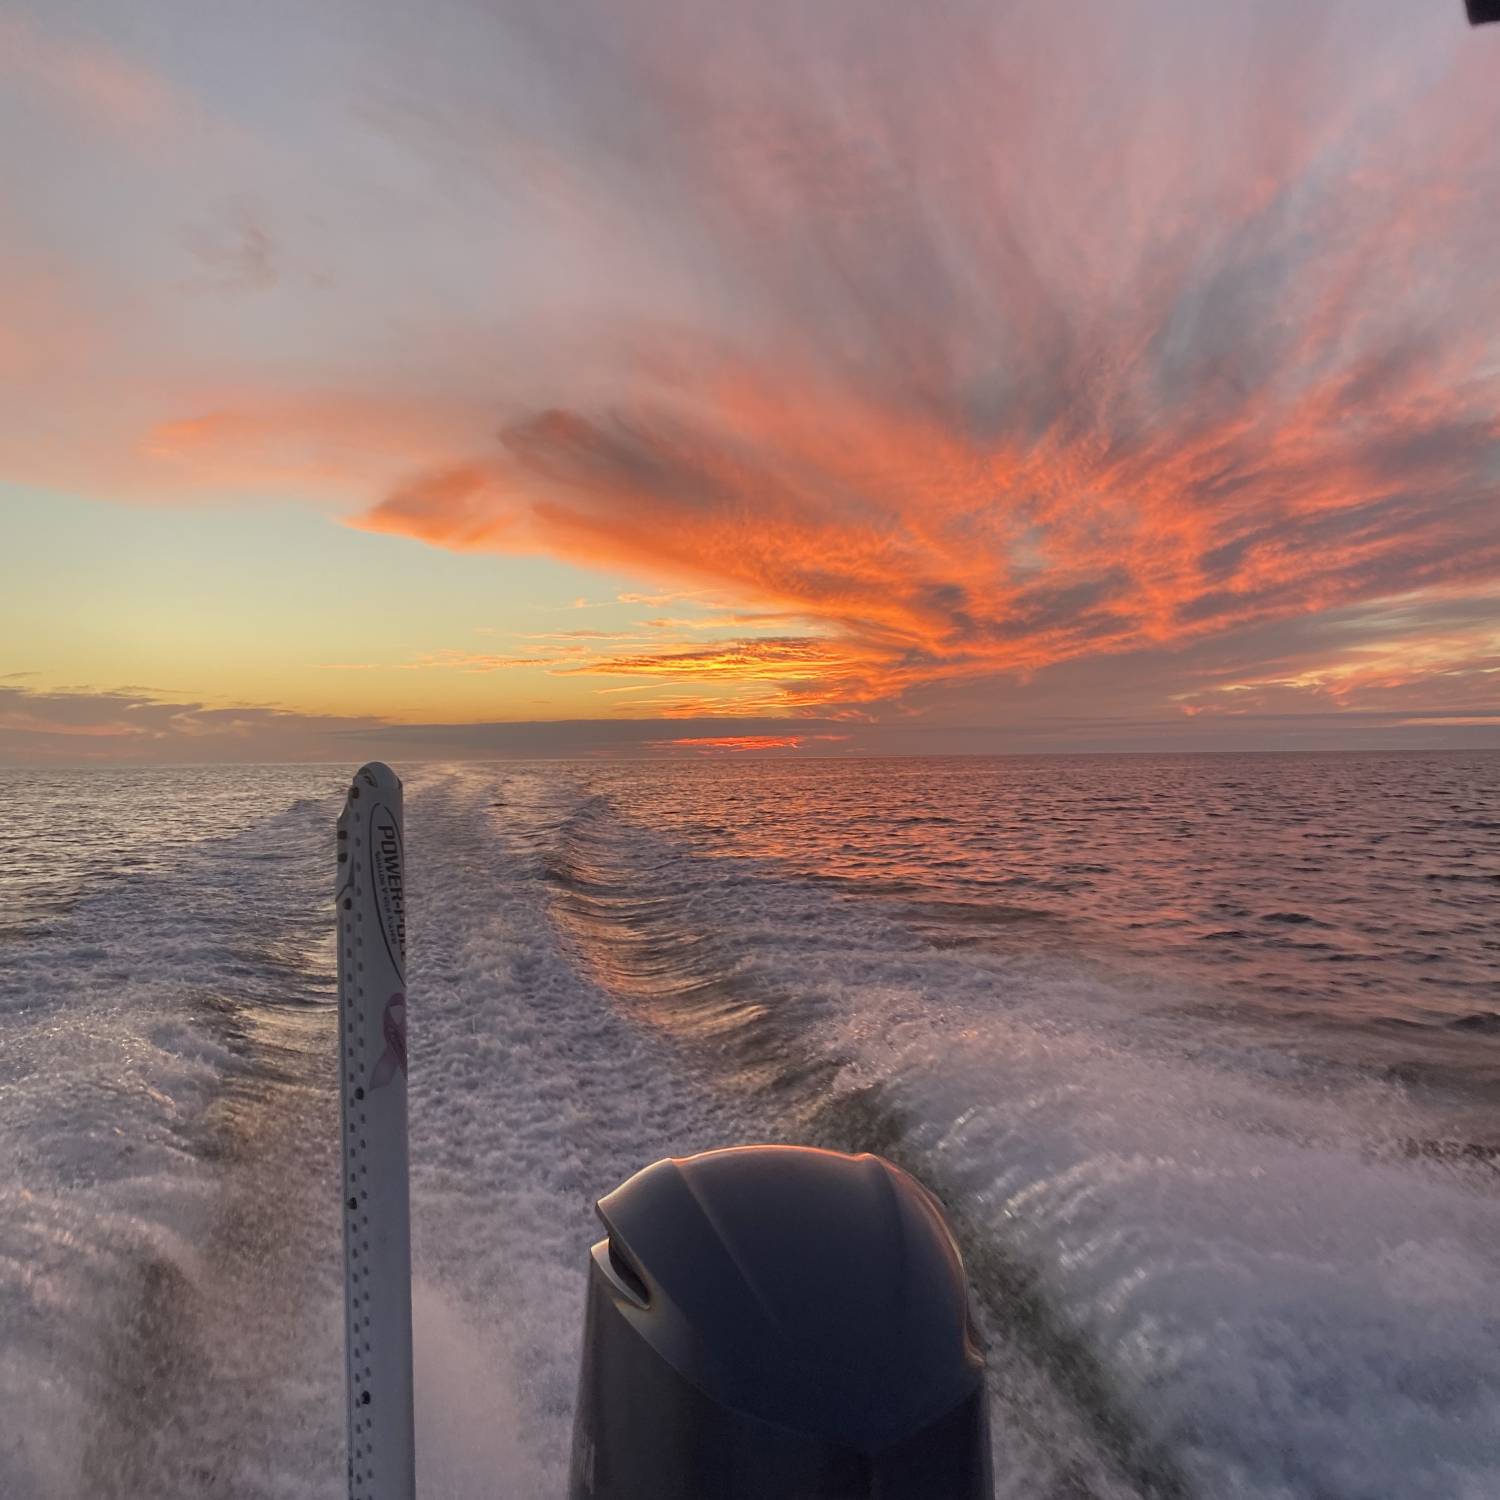 Fire on the horizon!! Sun setting on a great day fishing heading to the dock rolling comfortably in the Sporty...